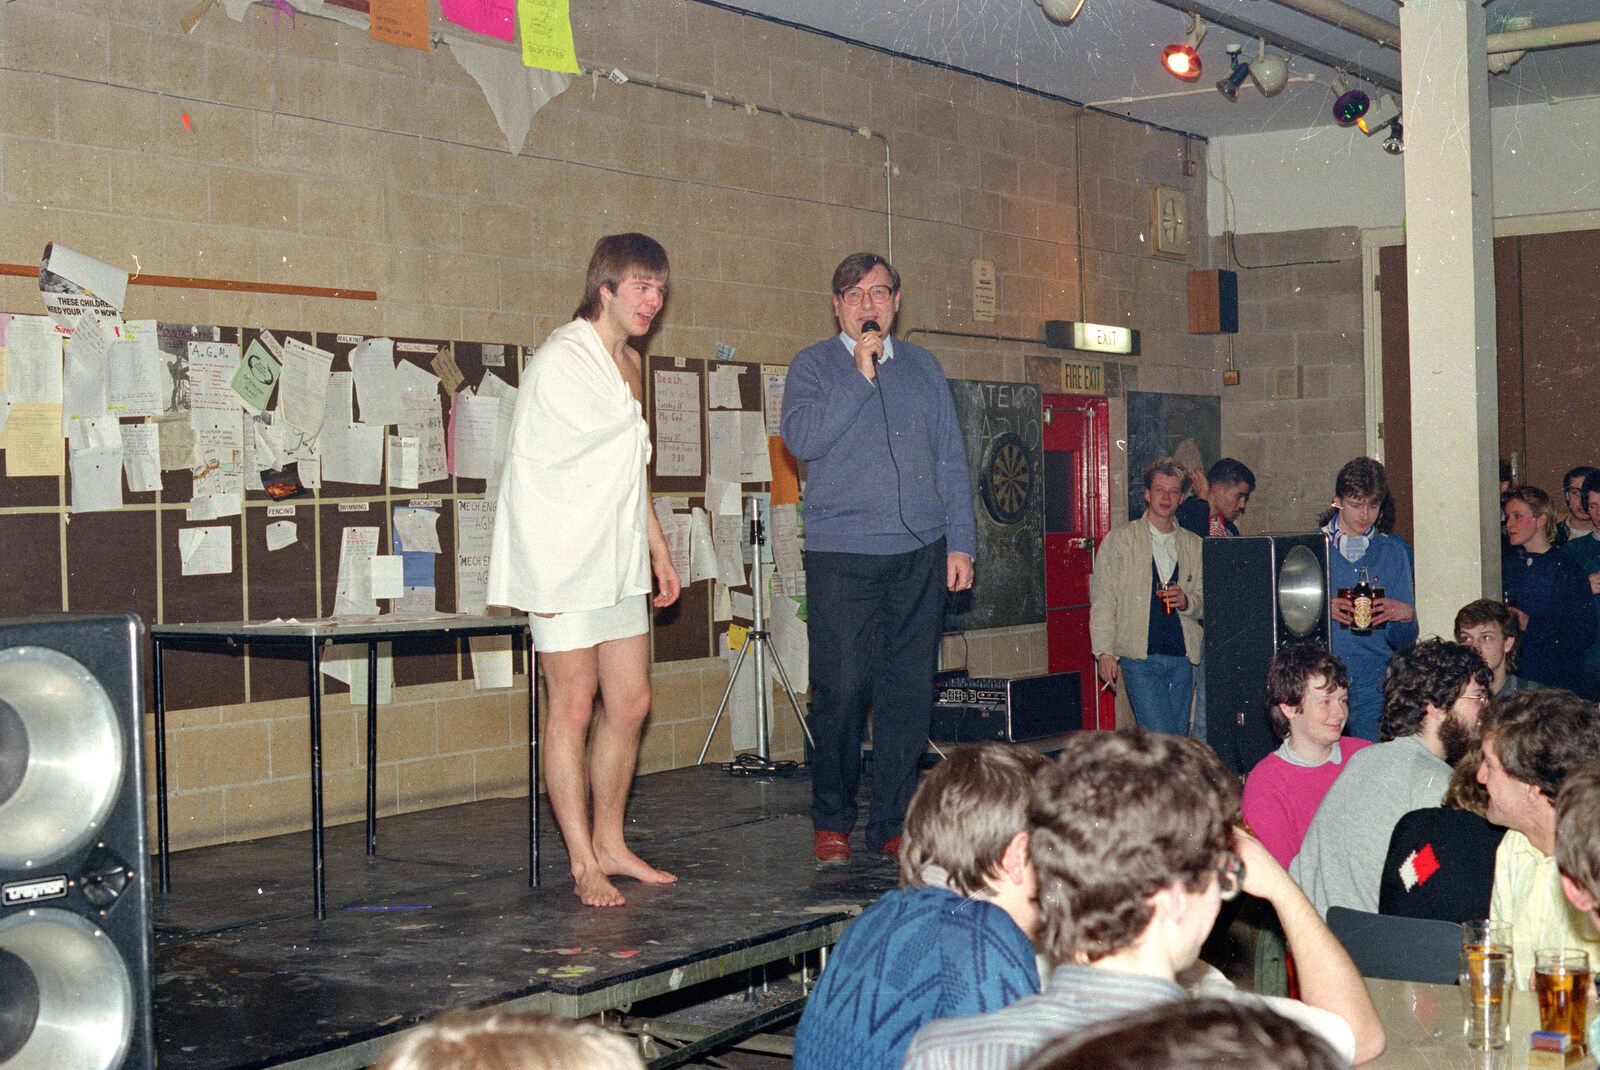 Roy speaks to the room from Uni: The PPSU "Jazz" RAG Review and Charity Auction, Plymouth, Devon - 19th February 1986